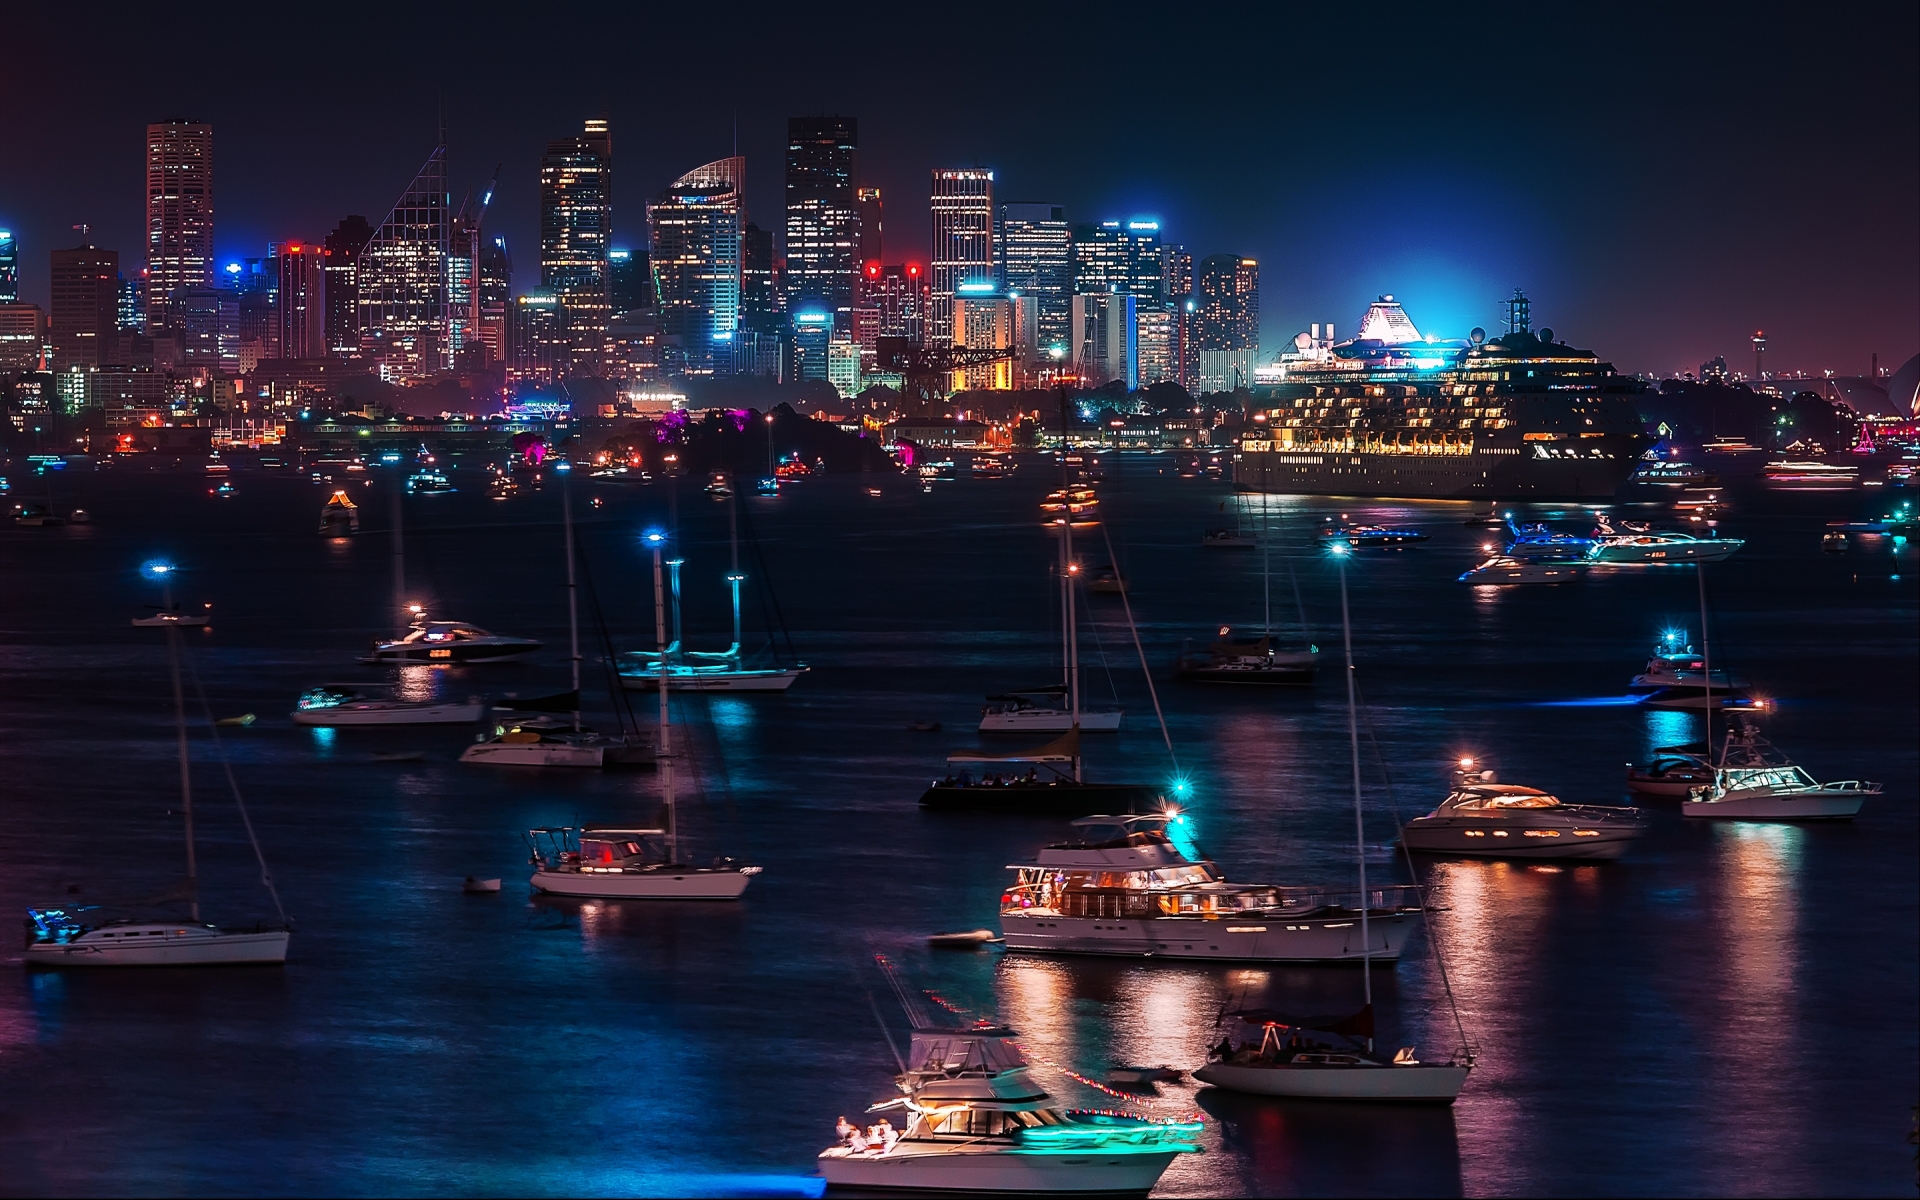 skyline, Cityscape, Night, Lights, Hdr, Harbor, Bay, Water, Reflection, Architecture, Buildings, Skyscrapers, Boats, Ships Wallpaper